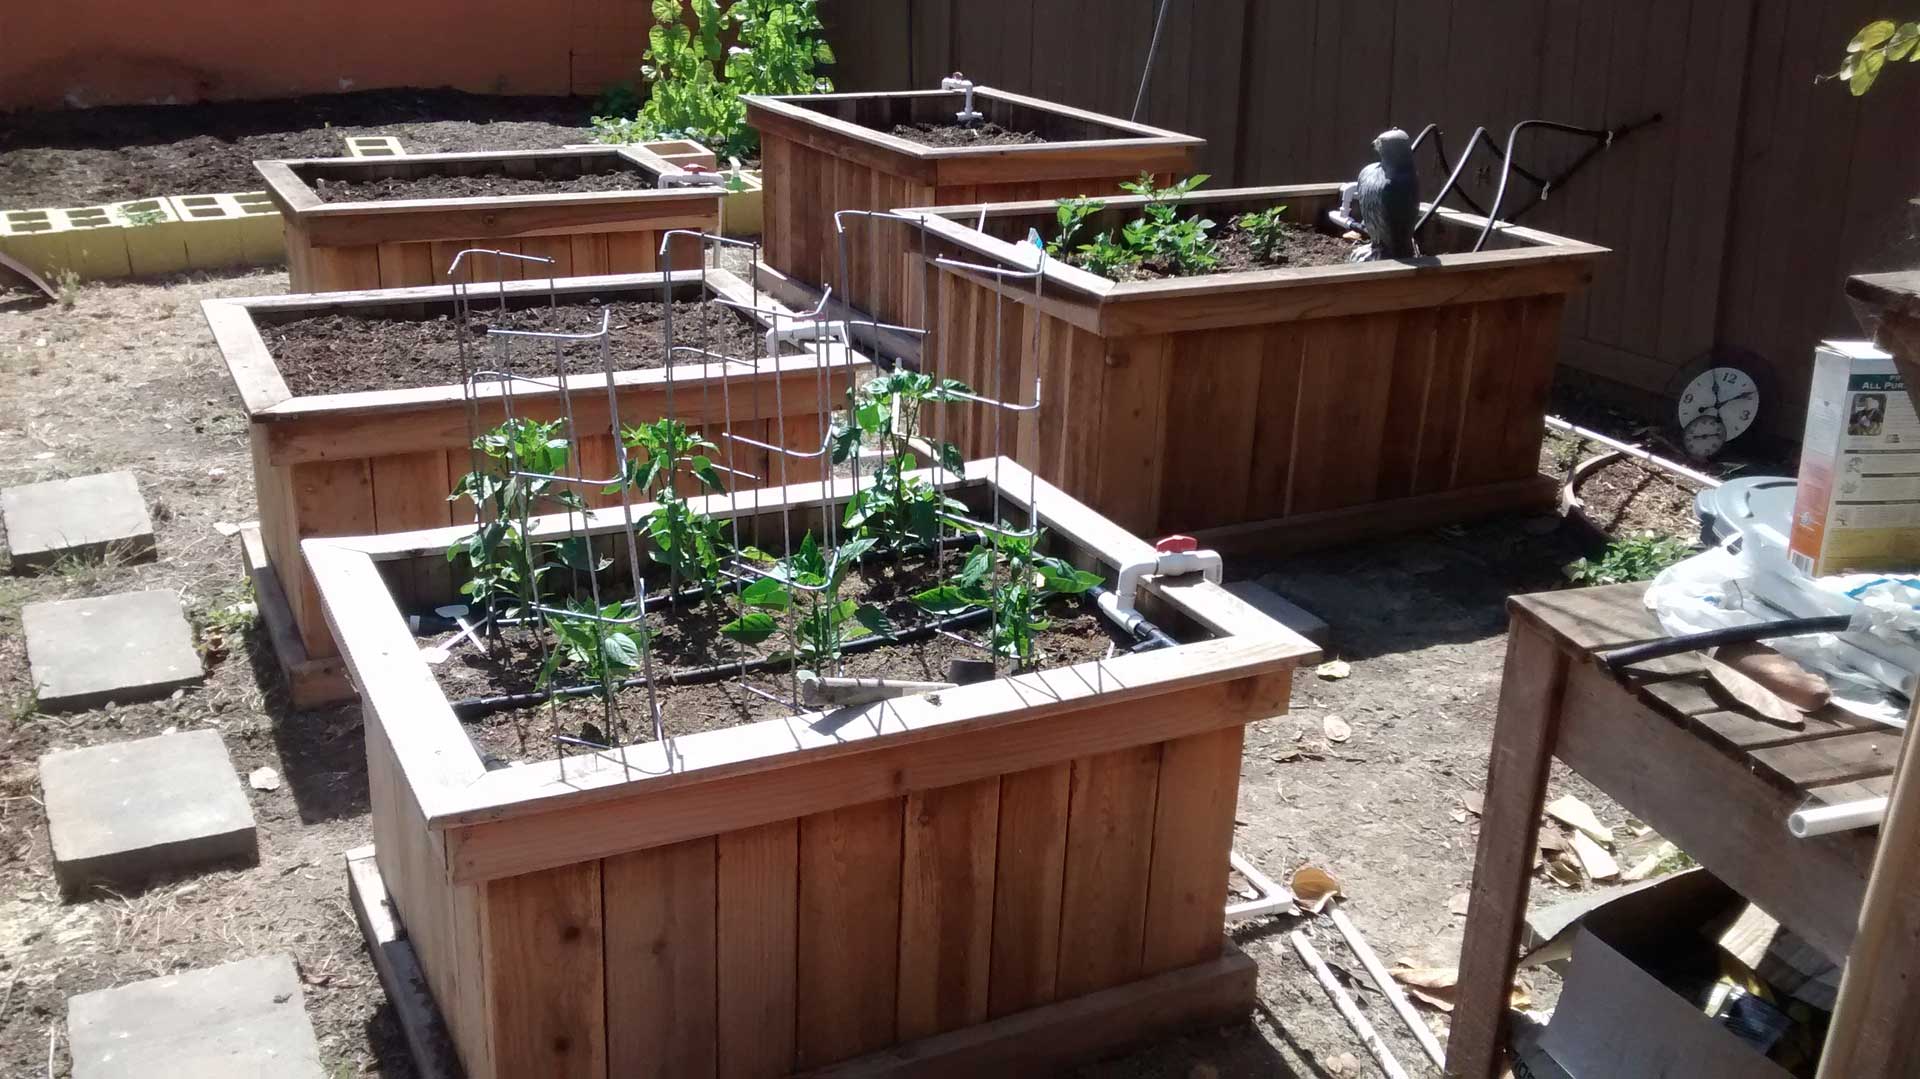 A group of wooden raised garden beds in a backyard.